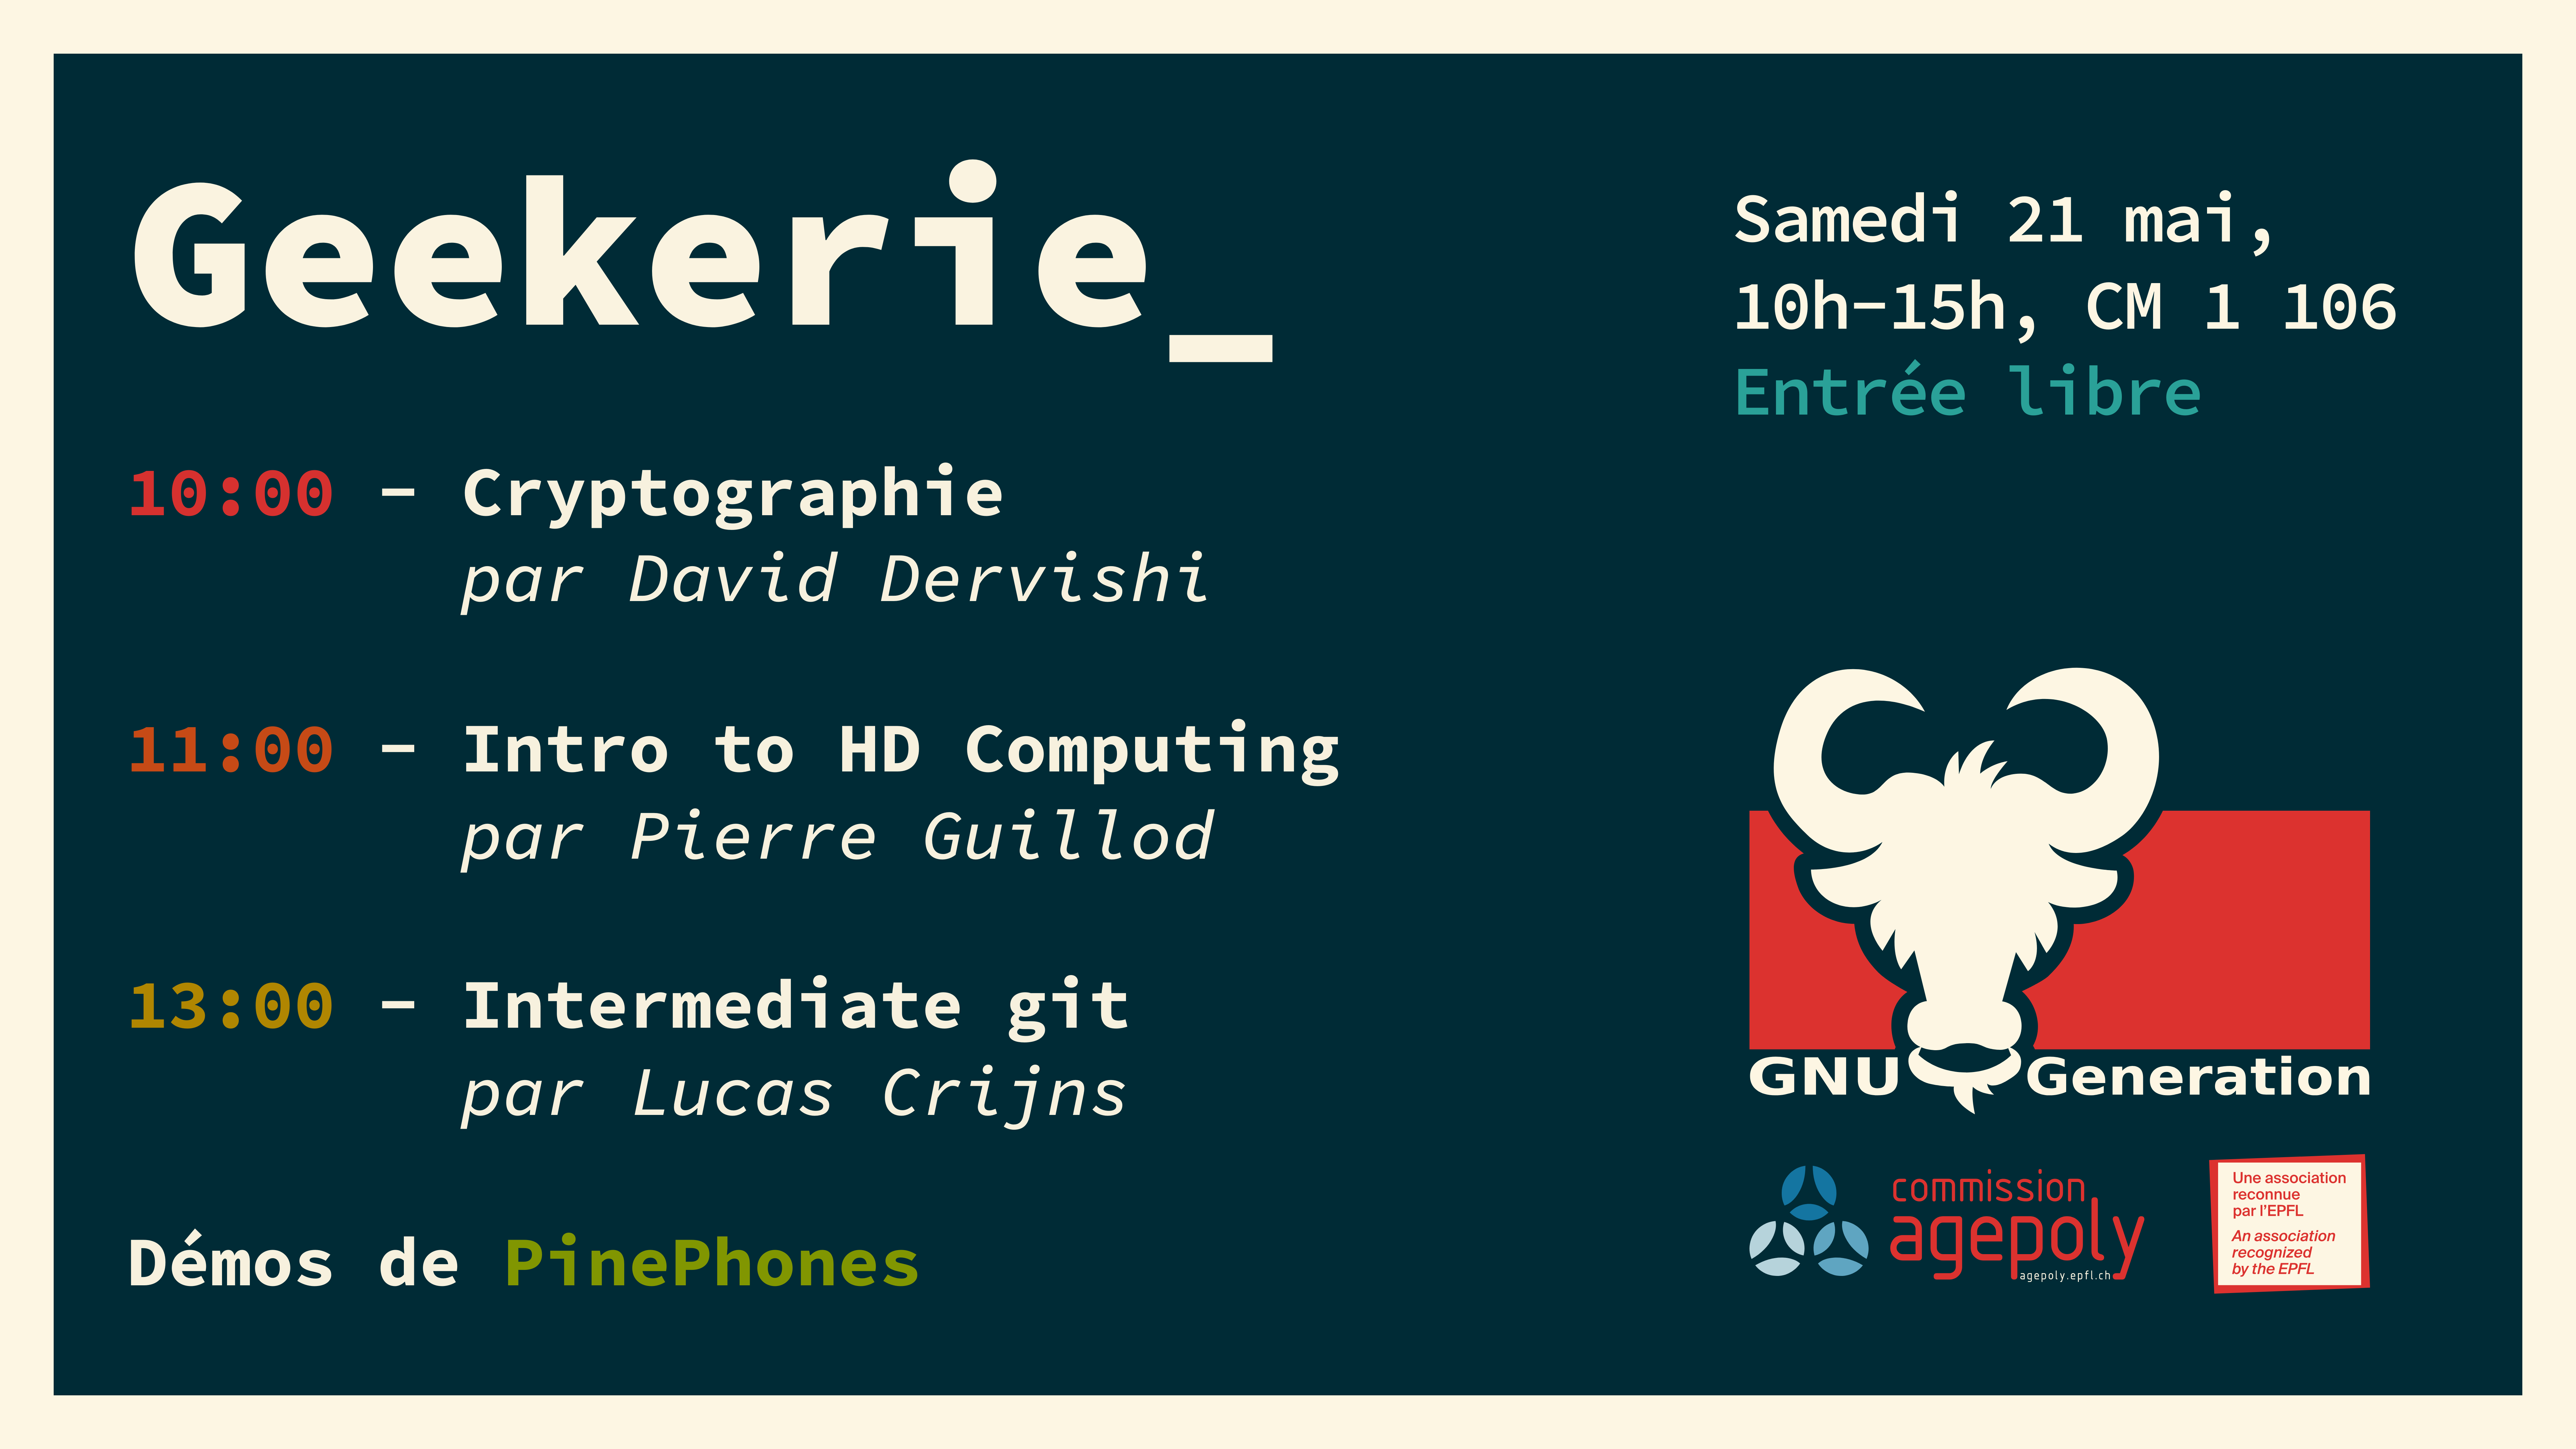 Geekerie poster. Schedule : Saturday May 21, from 10 am to 3 pm, CM 1 106. Free entry. Program : 10 am, talk Cryptography by David Dervishi. 11 am, talk Introduction to HD Computing by Pierre Guillod. À 1 pm, workshop Intermediate git by Lucas Crijns.